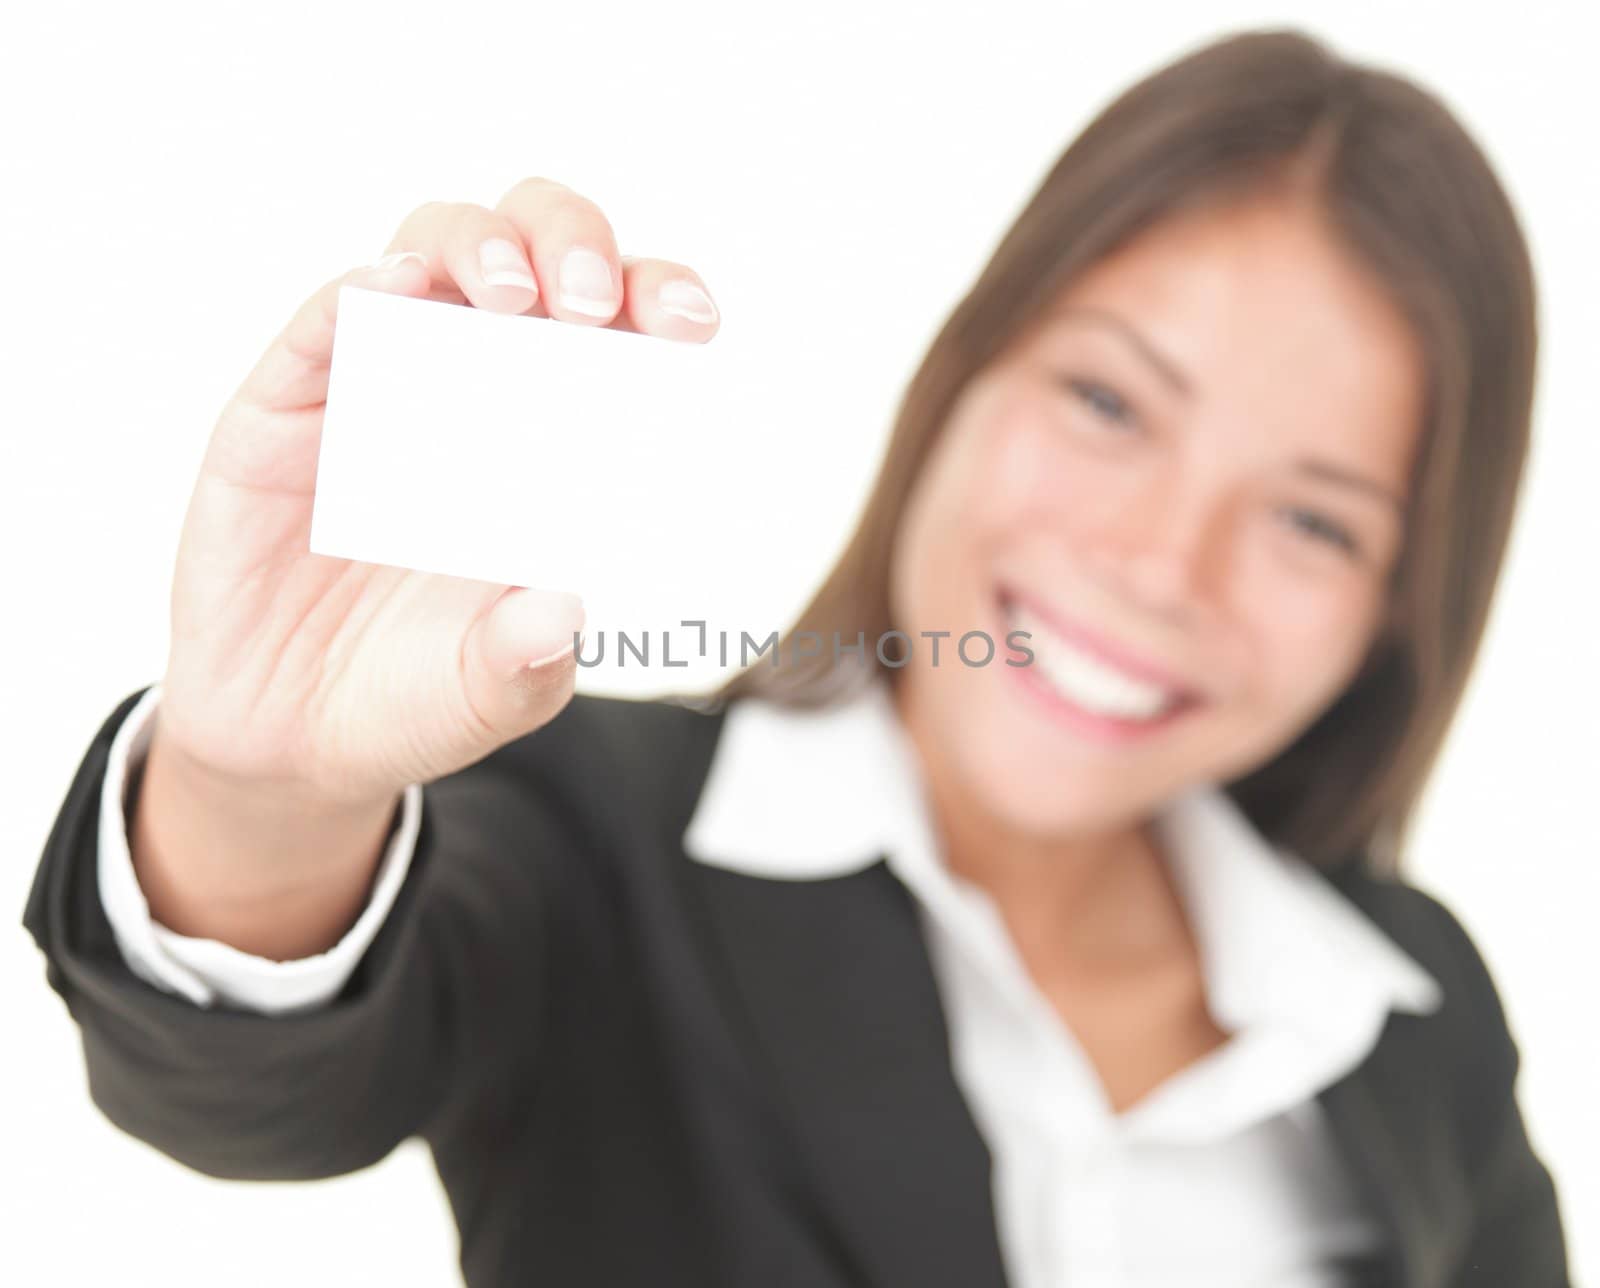 Business card businesswoman in suit. Woman in her 20s showing blank business card sign isolated on white background. Focus on business card